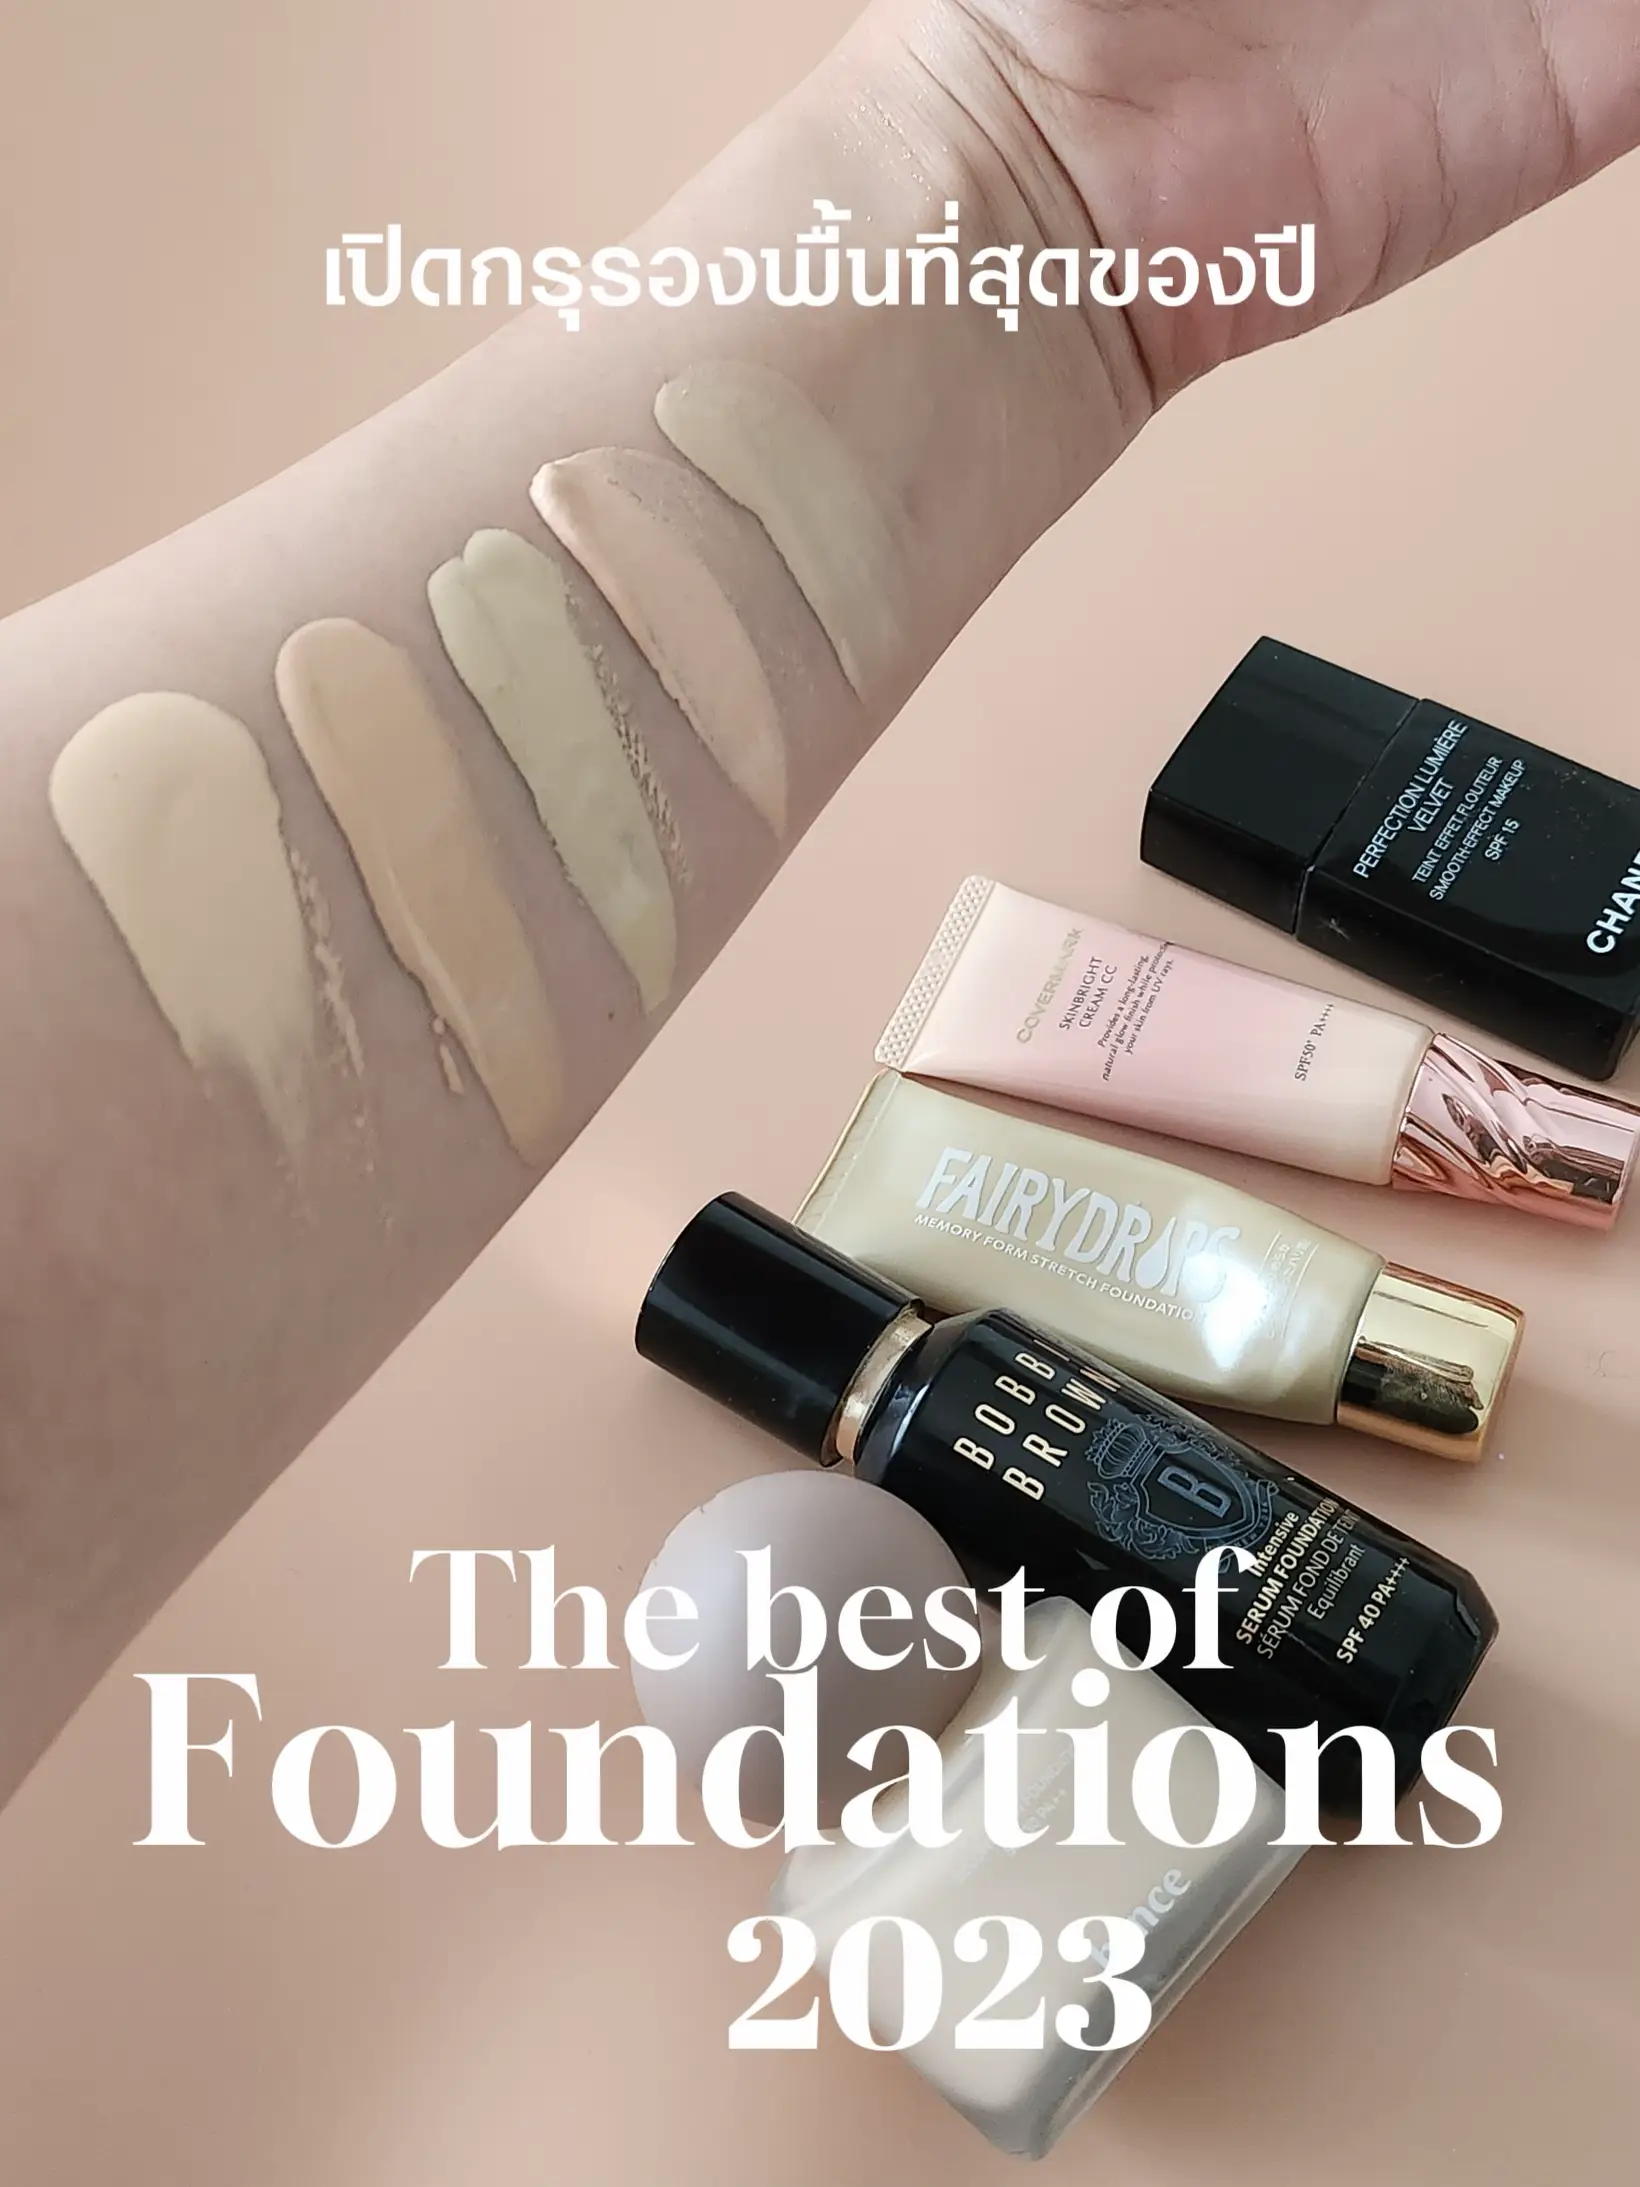 Best of foundation ✨ includes all used ones. I like it